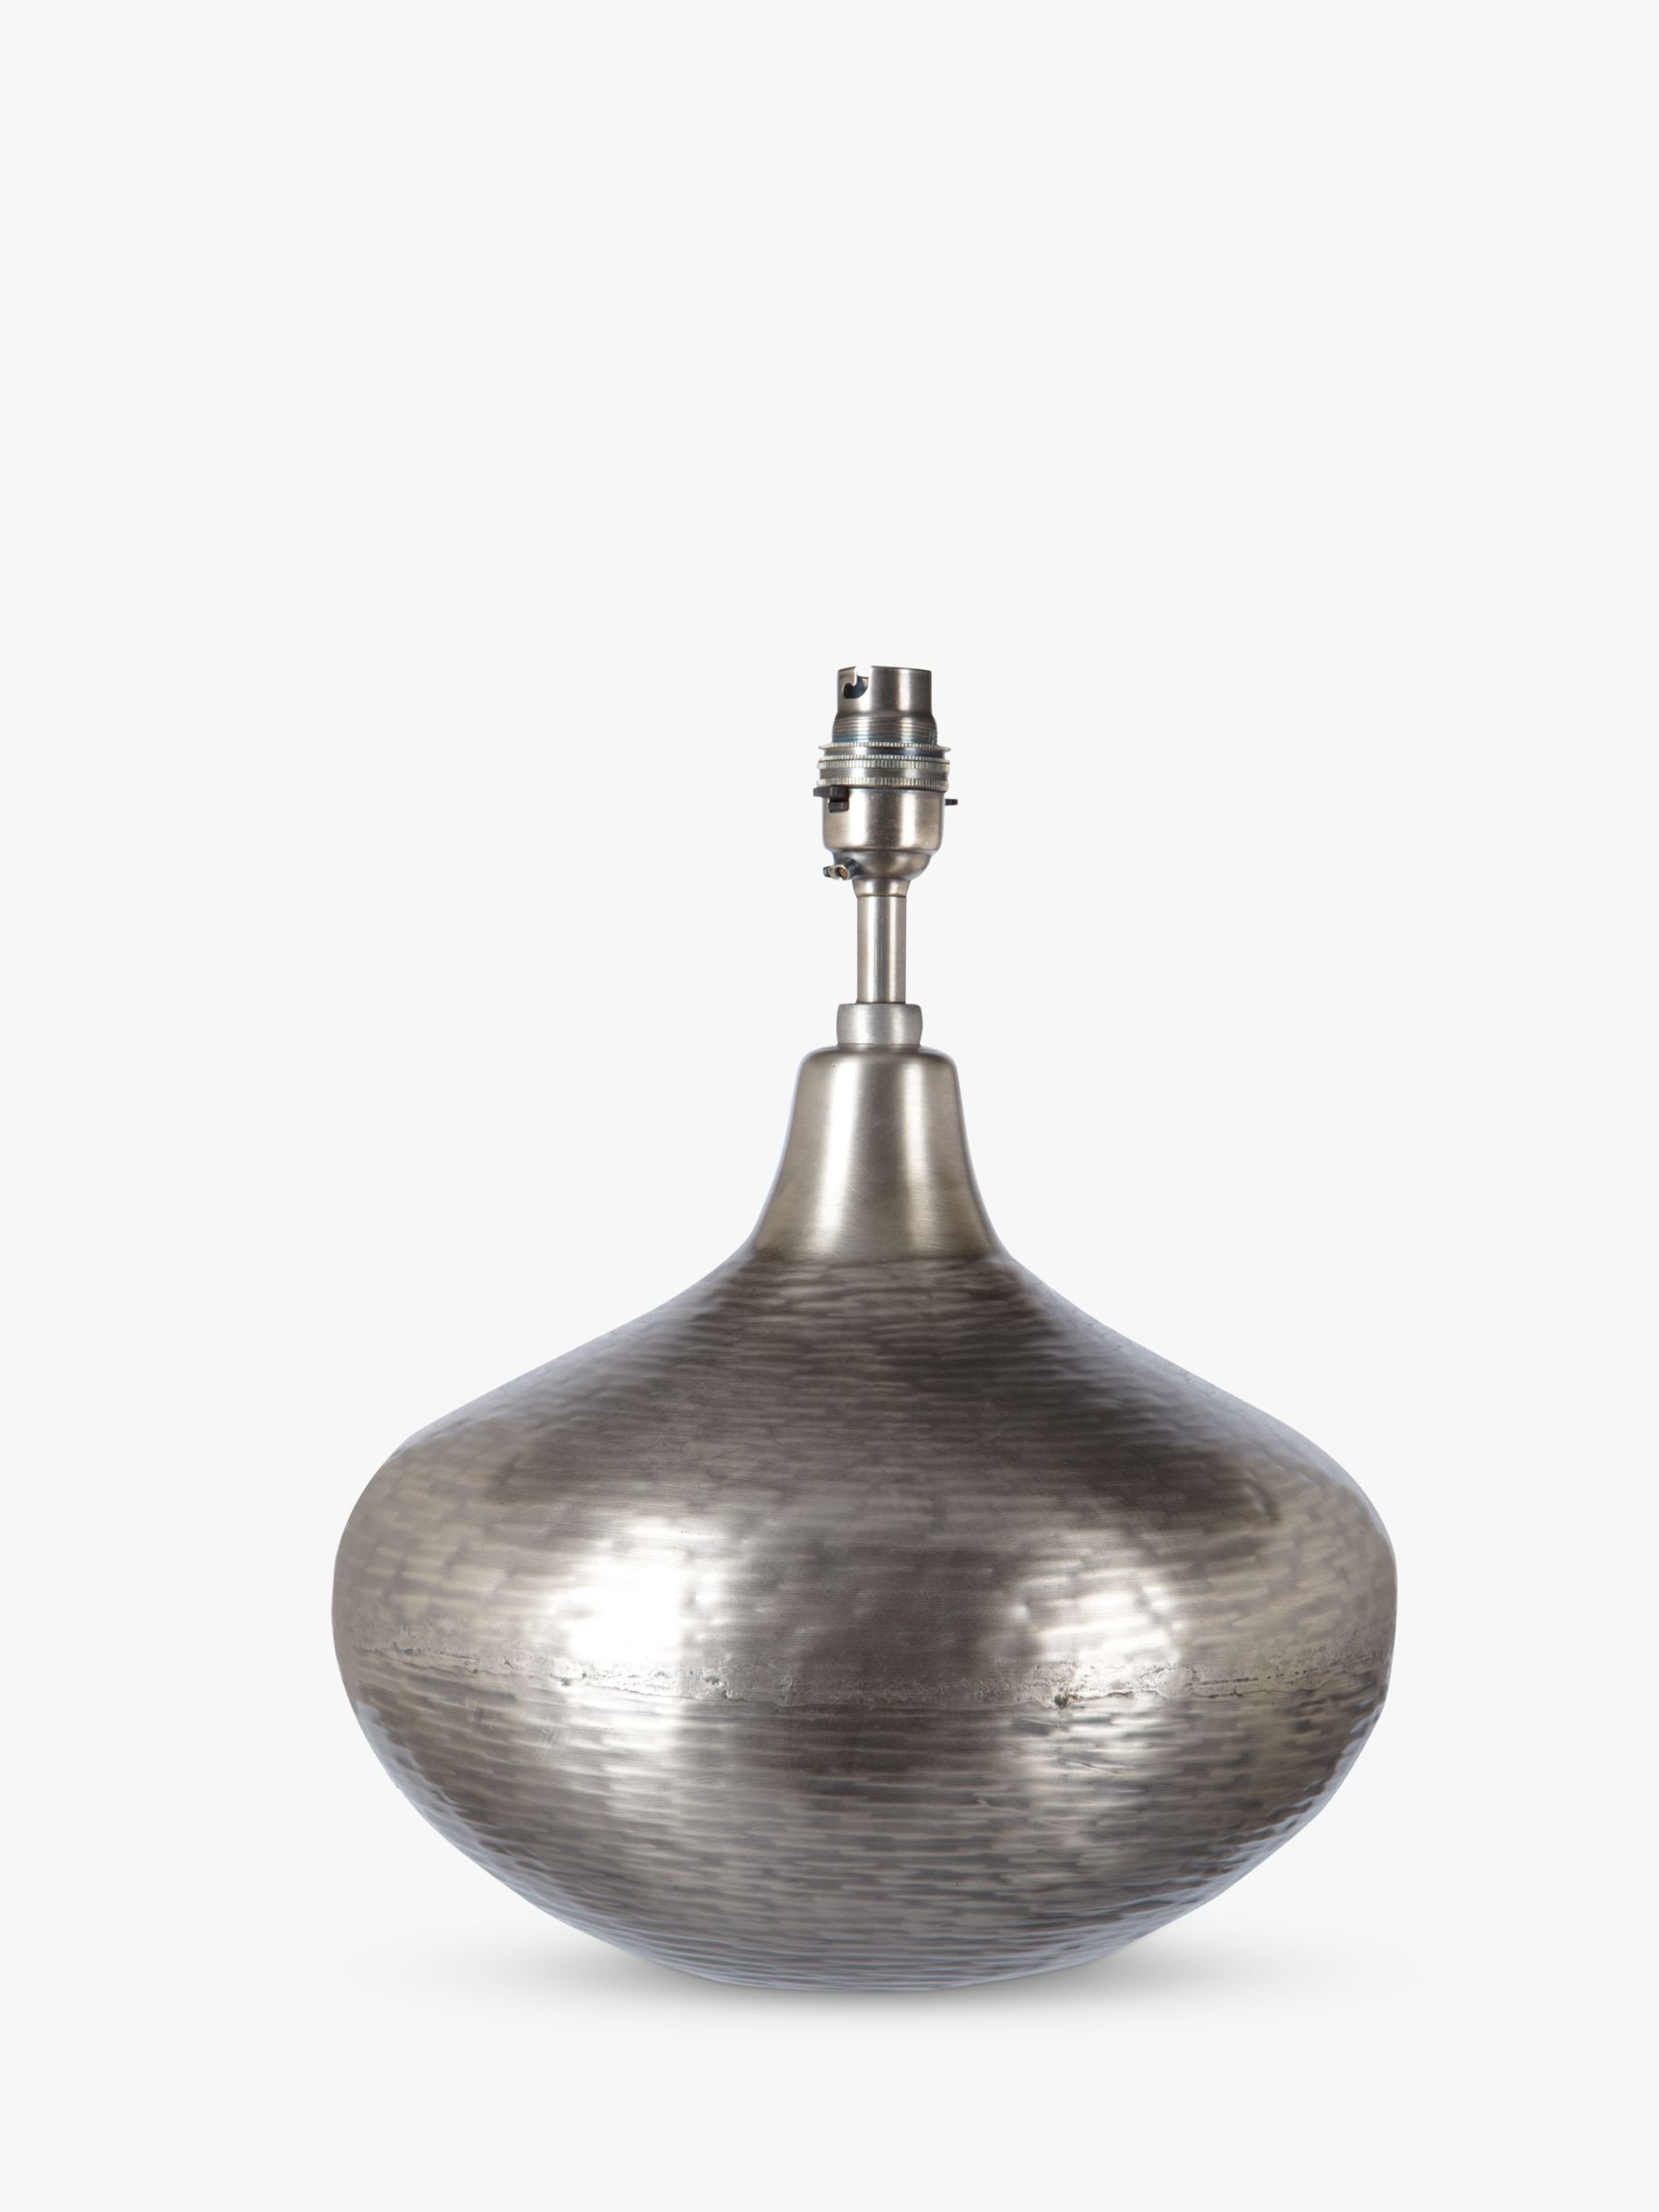 Hammered Onion Lamp Base H30cm, Large Hammered Brass Table Lamp